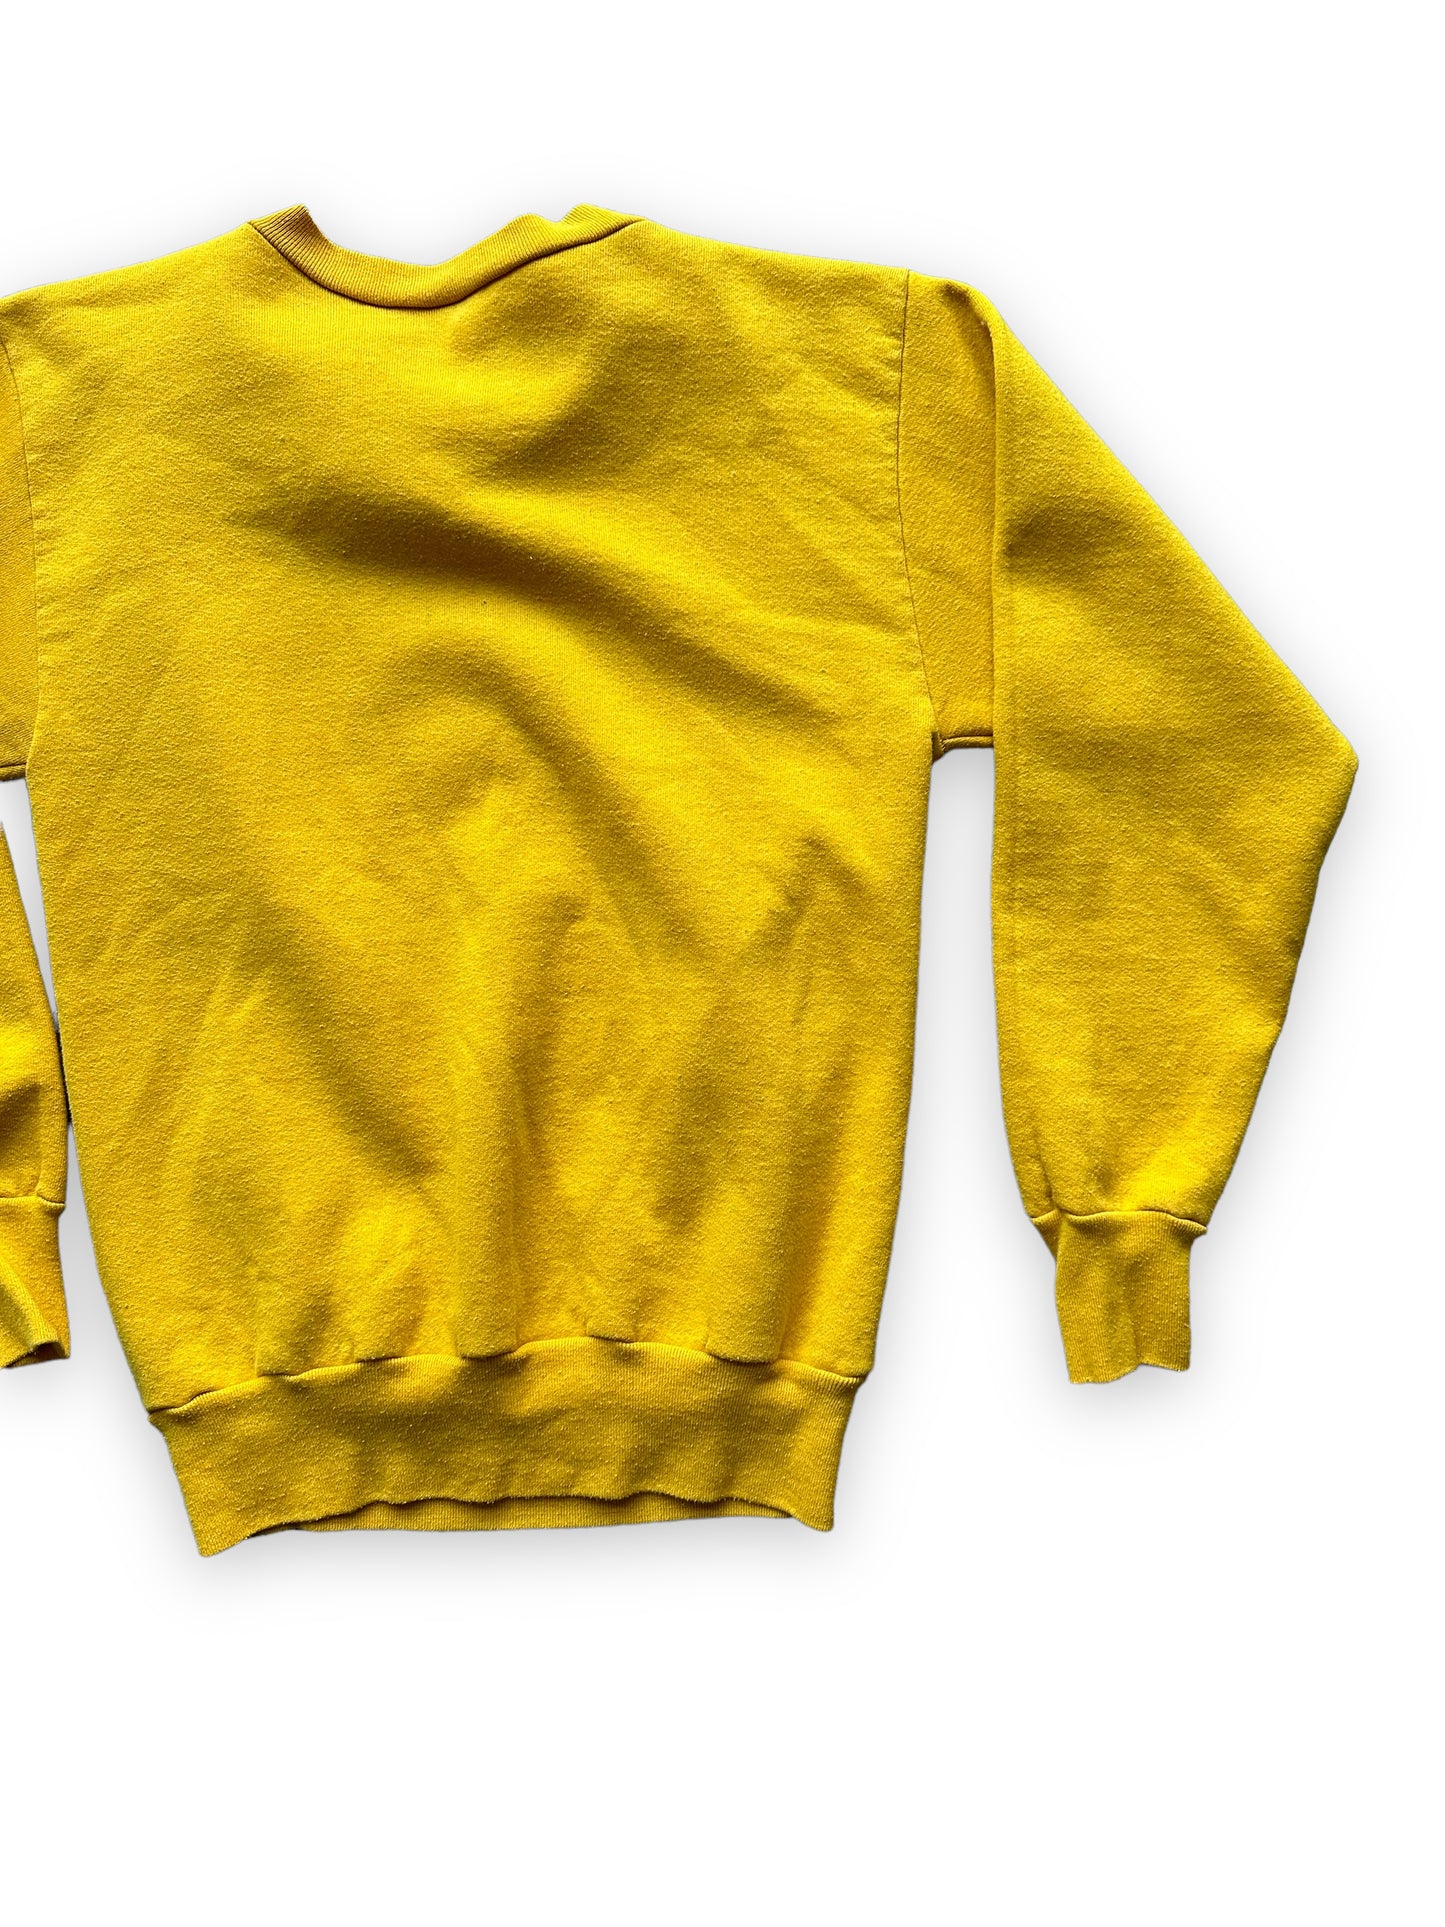 Right Rear View of Vintage Yellow Wyoming Crewneck Sweatshirt SZ M | Vintage Crewneck Sweatshirt Seattle | Barn Owl Vintage Seattle